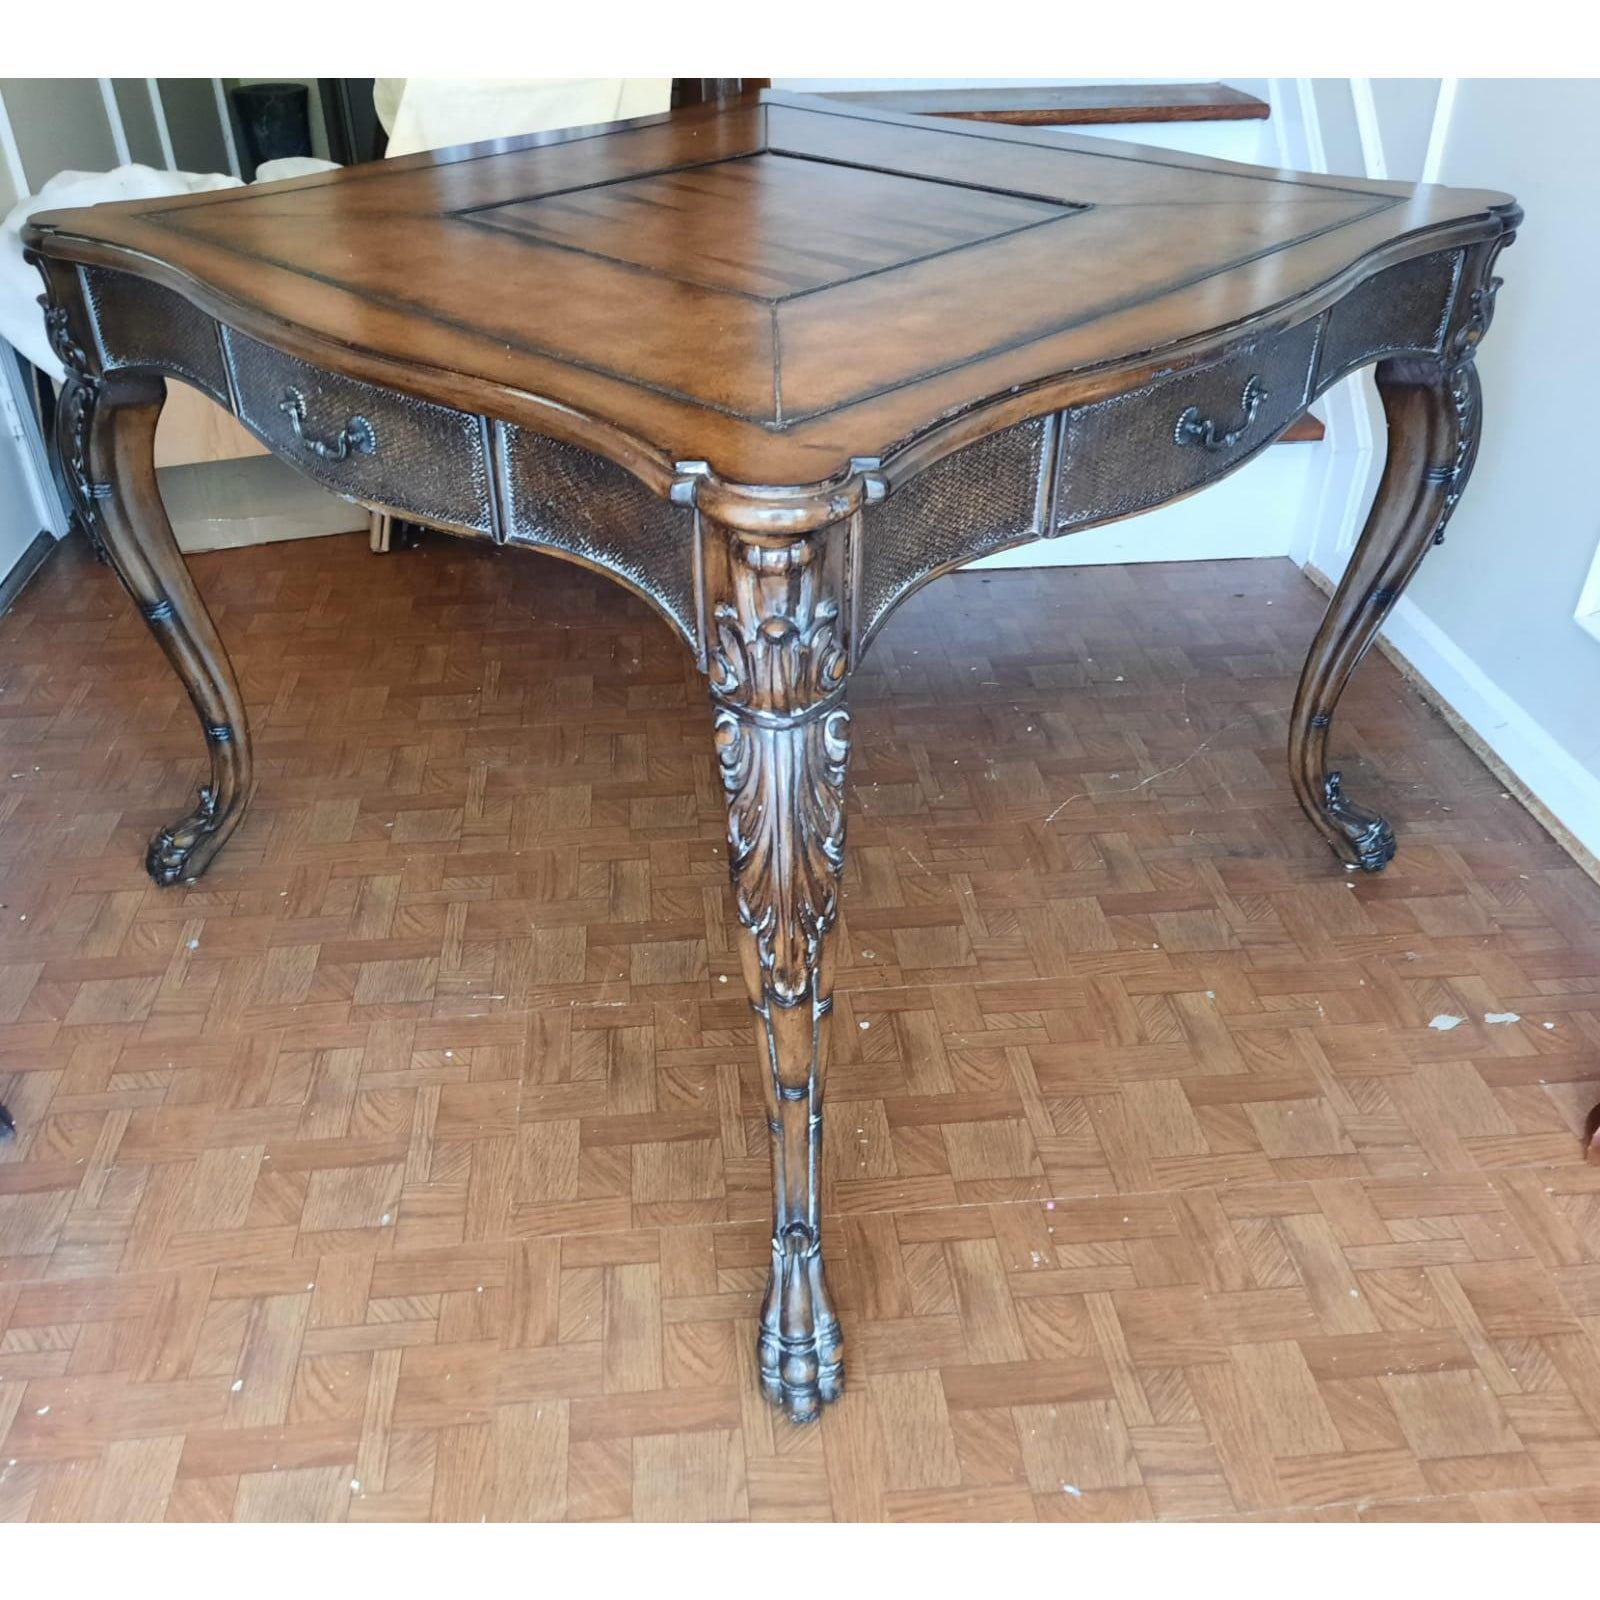 Arts & Crafts vintage walnut game table. Reversible chess game board. Leather Insert Table Top, intricately carved Legs flanked with paw feet. Four drawers for games pieces and accessories. Table comes apart for easy handling,in fact each leg is